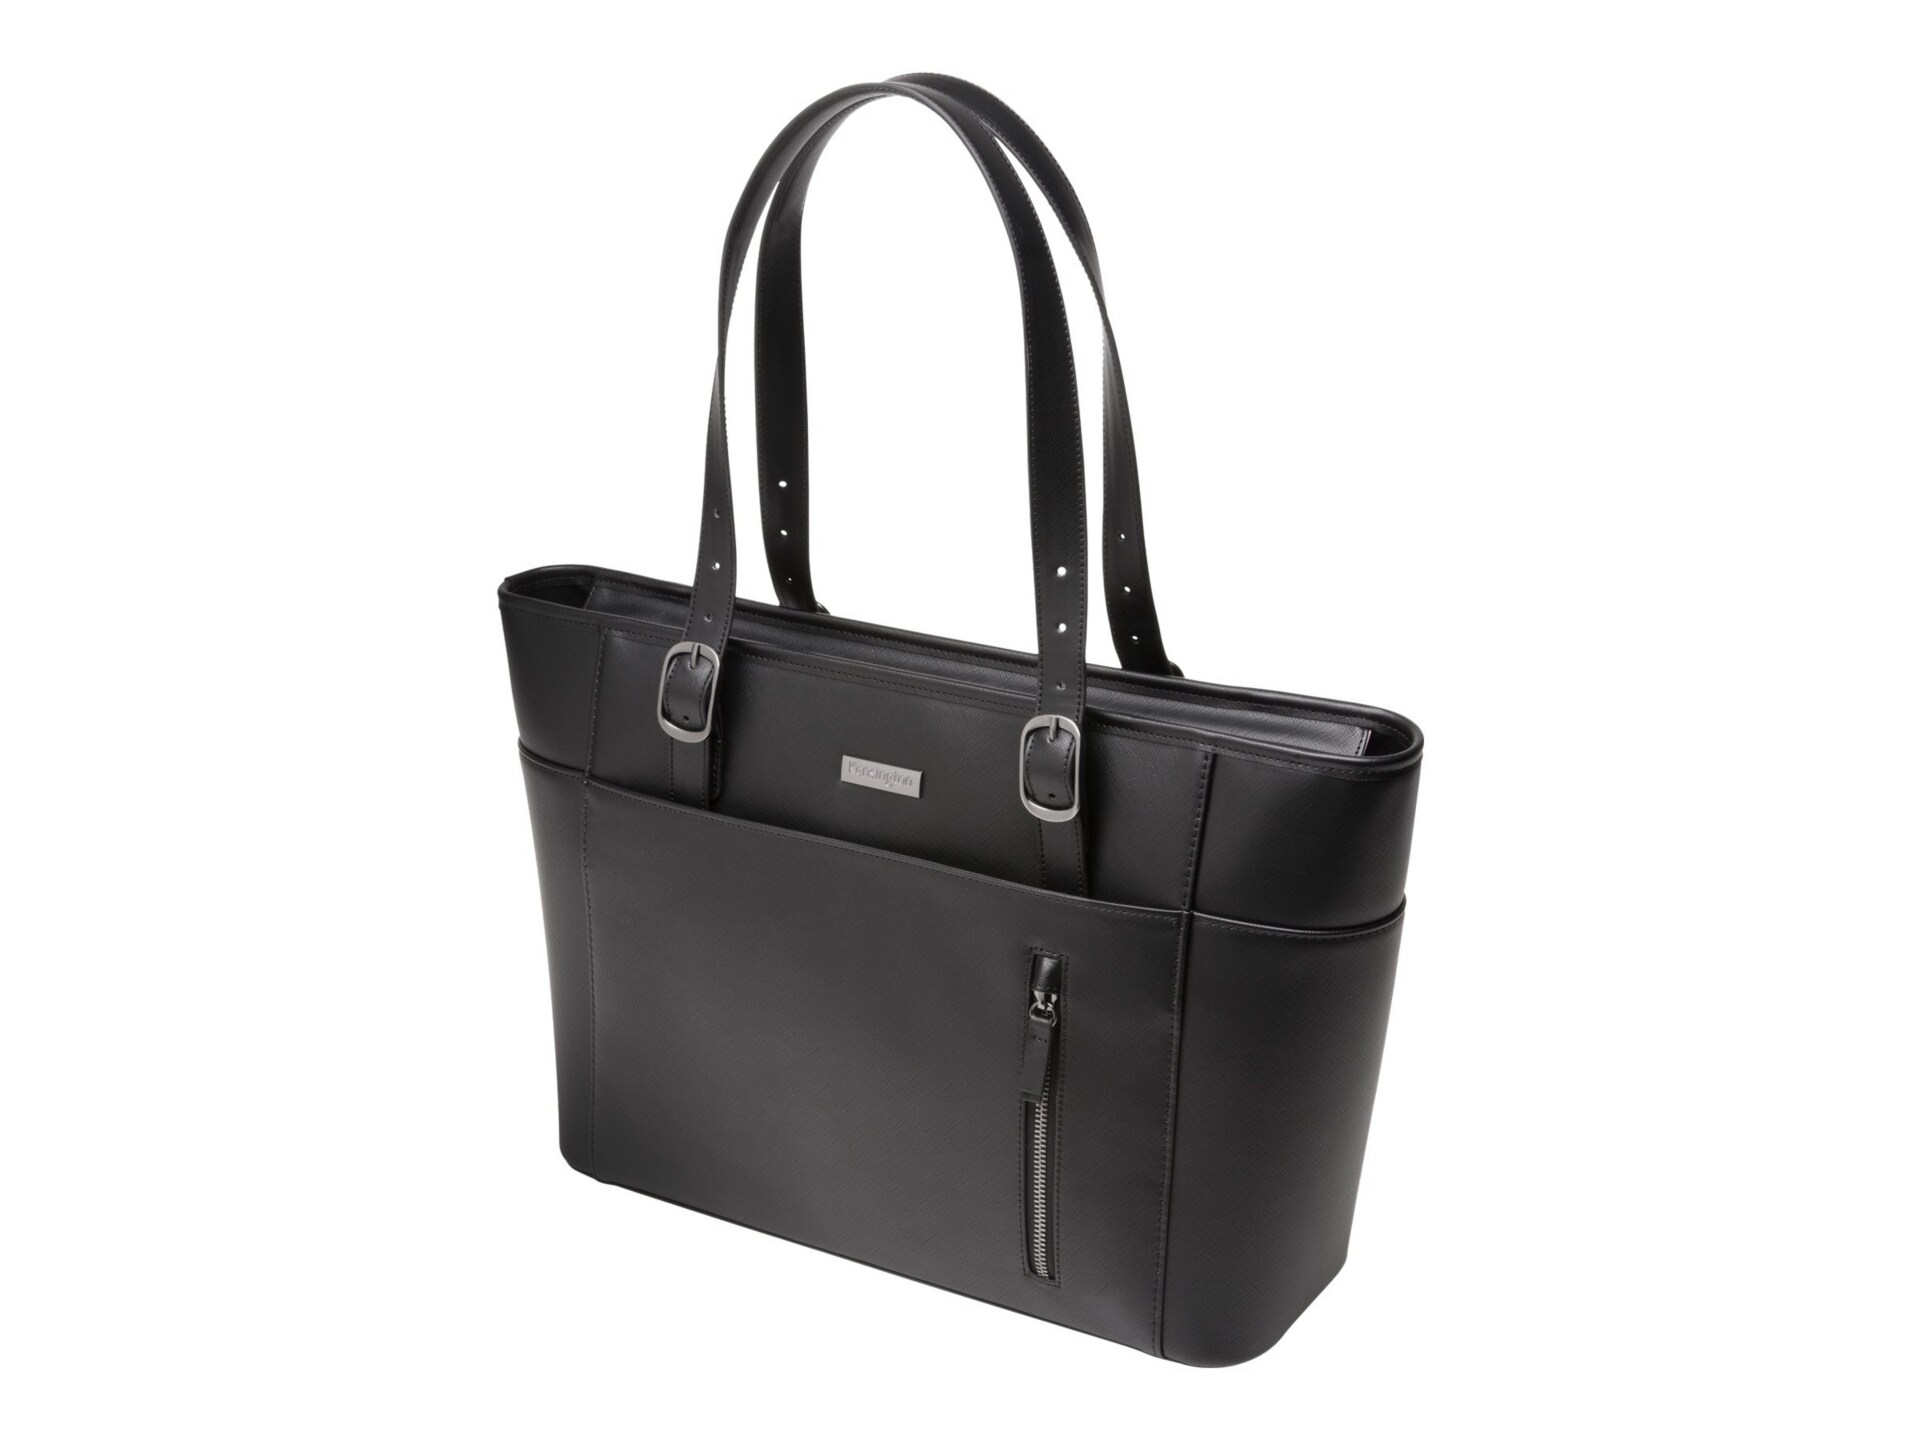 Kensington Laptop Tote LM670 notebook carrying case